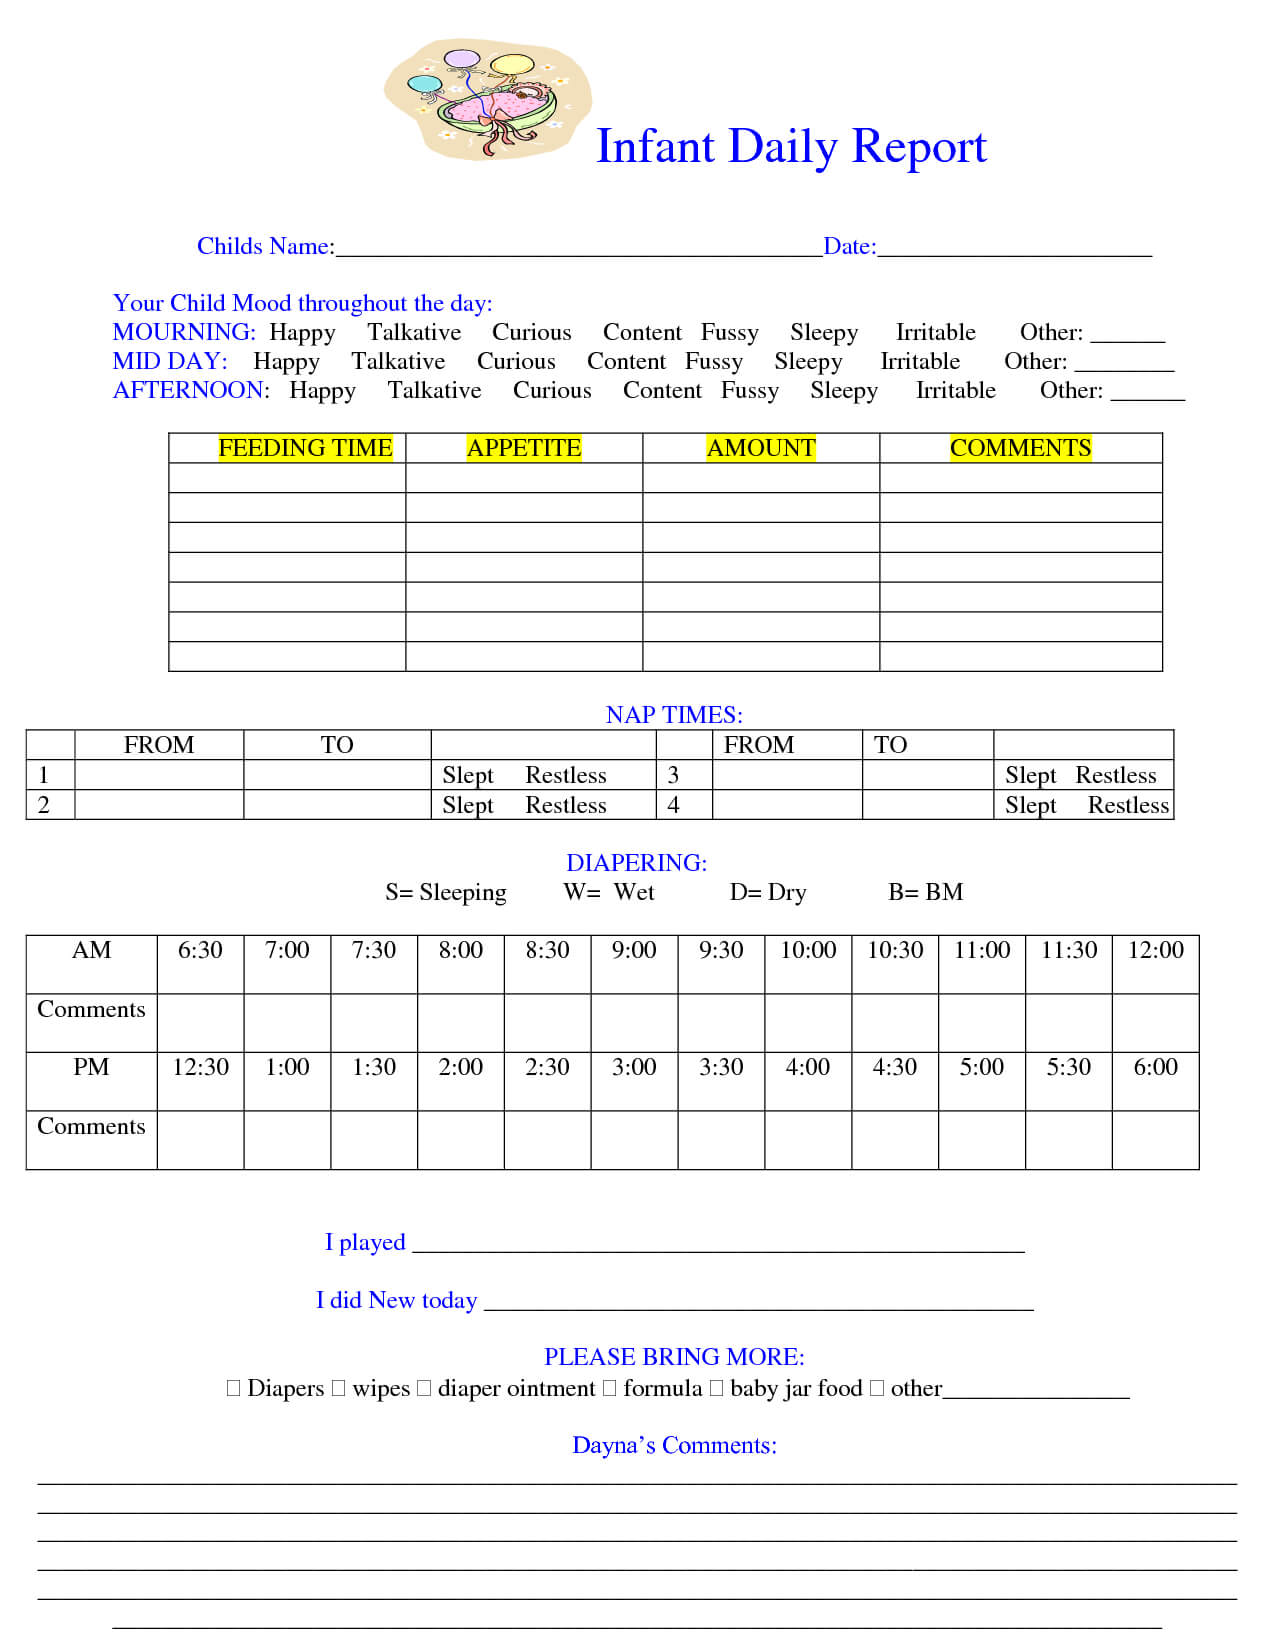 daycare-infant-daily-report-template